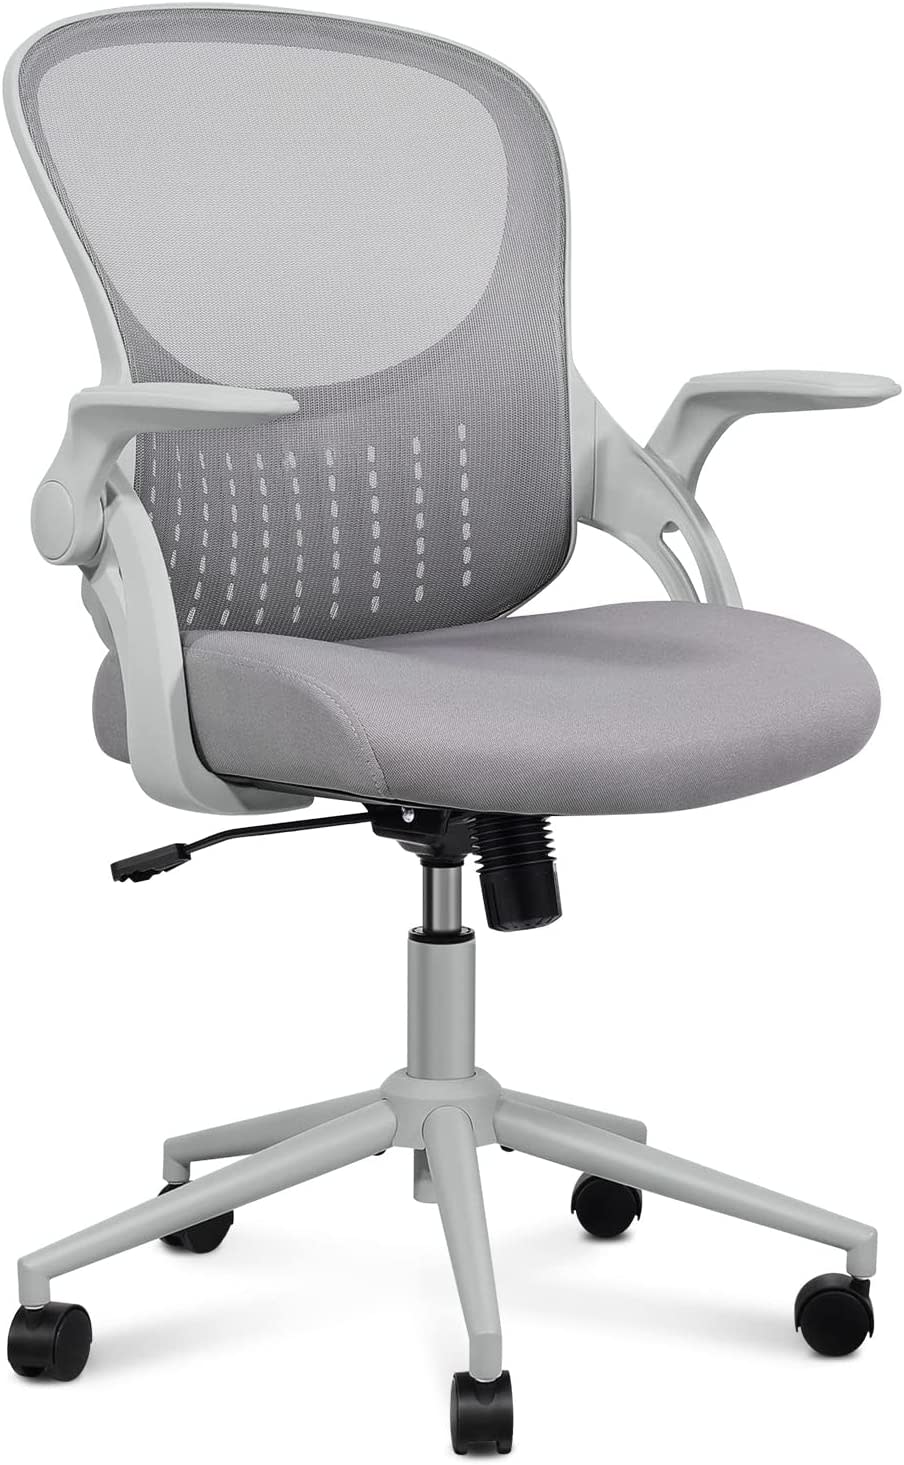 The Excellent and Cheap Mesh Back Office Chair From SMUG is Half Off